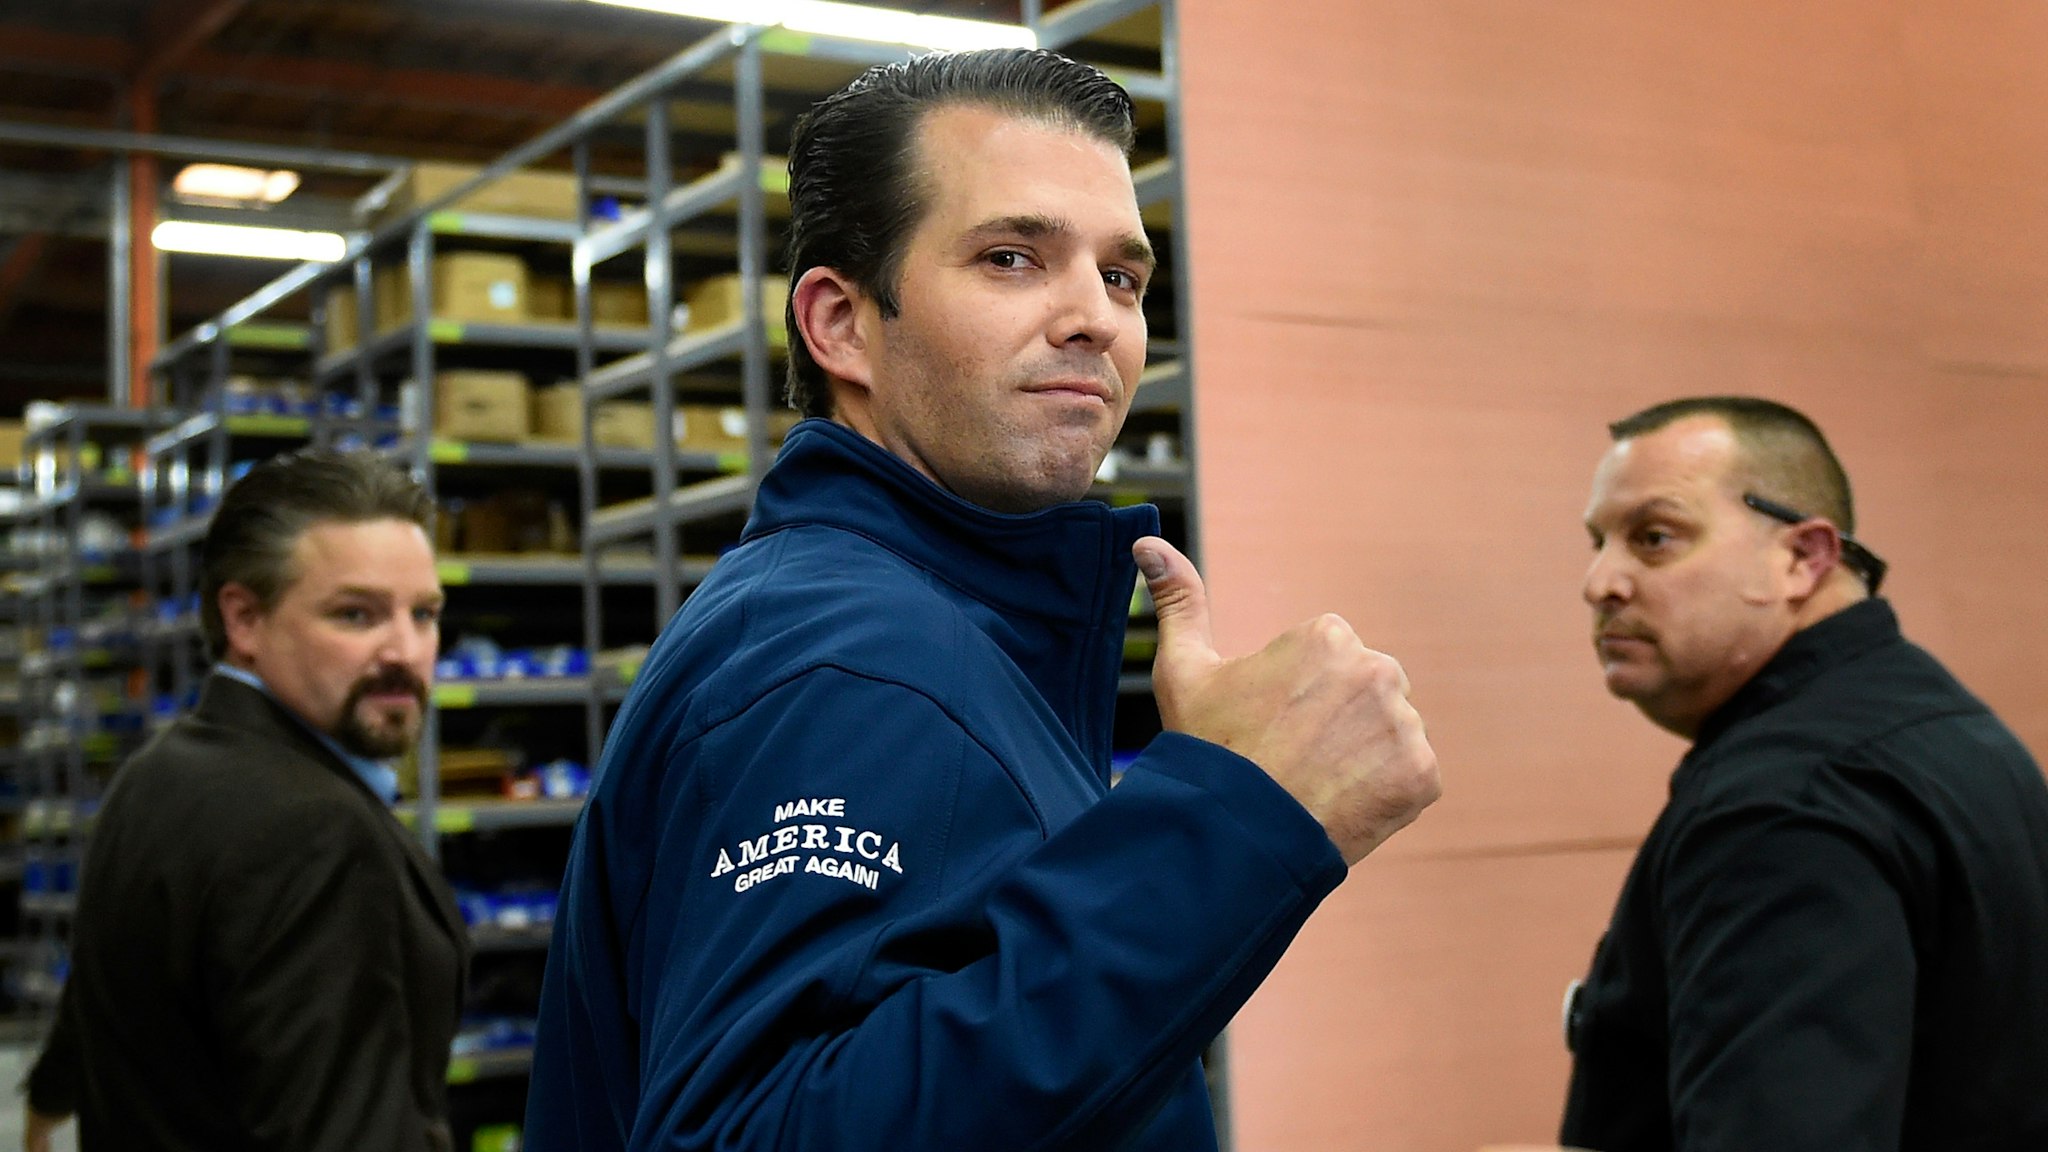 LAS VEGAS, NV - NOVEMBER 03: Donald Trump Jr. gives a thumbs-up after a get-out-the-vote rally for his father, Republican presidential nominee Donald Trump, at Ahern Manufacturing on November 3, 2016 in Las Vegas, Nevada. Trump Jr. urged people to vote for his father during early voting, which ends on November 4 in the battleground state, and on Election Day November 8.